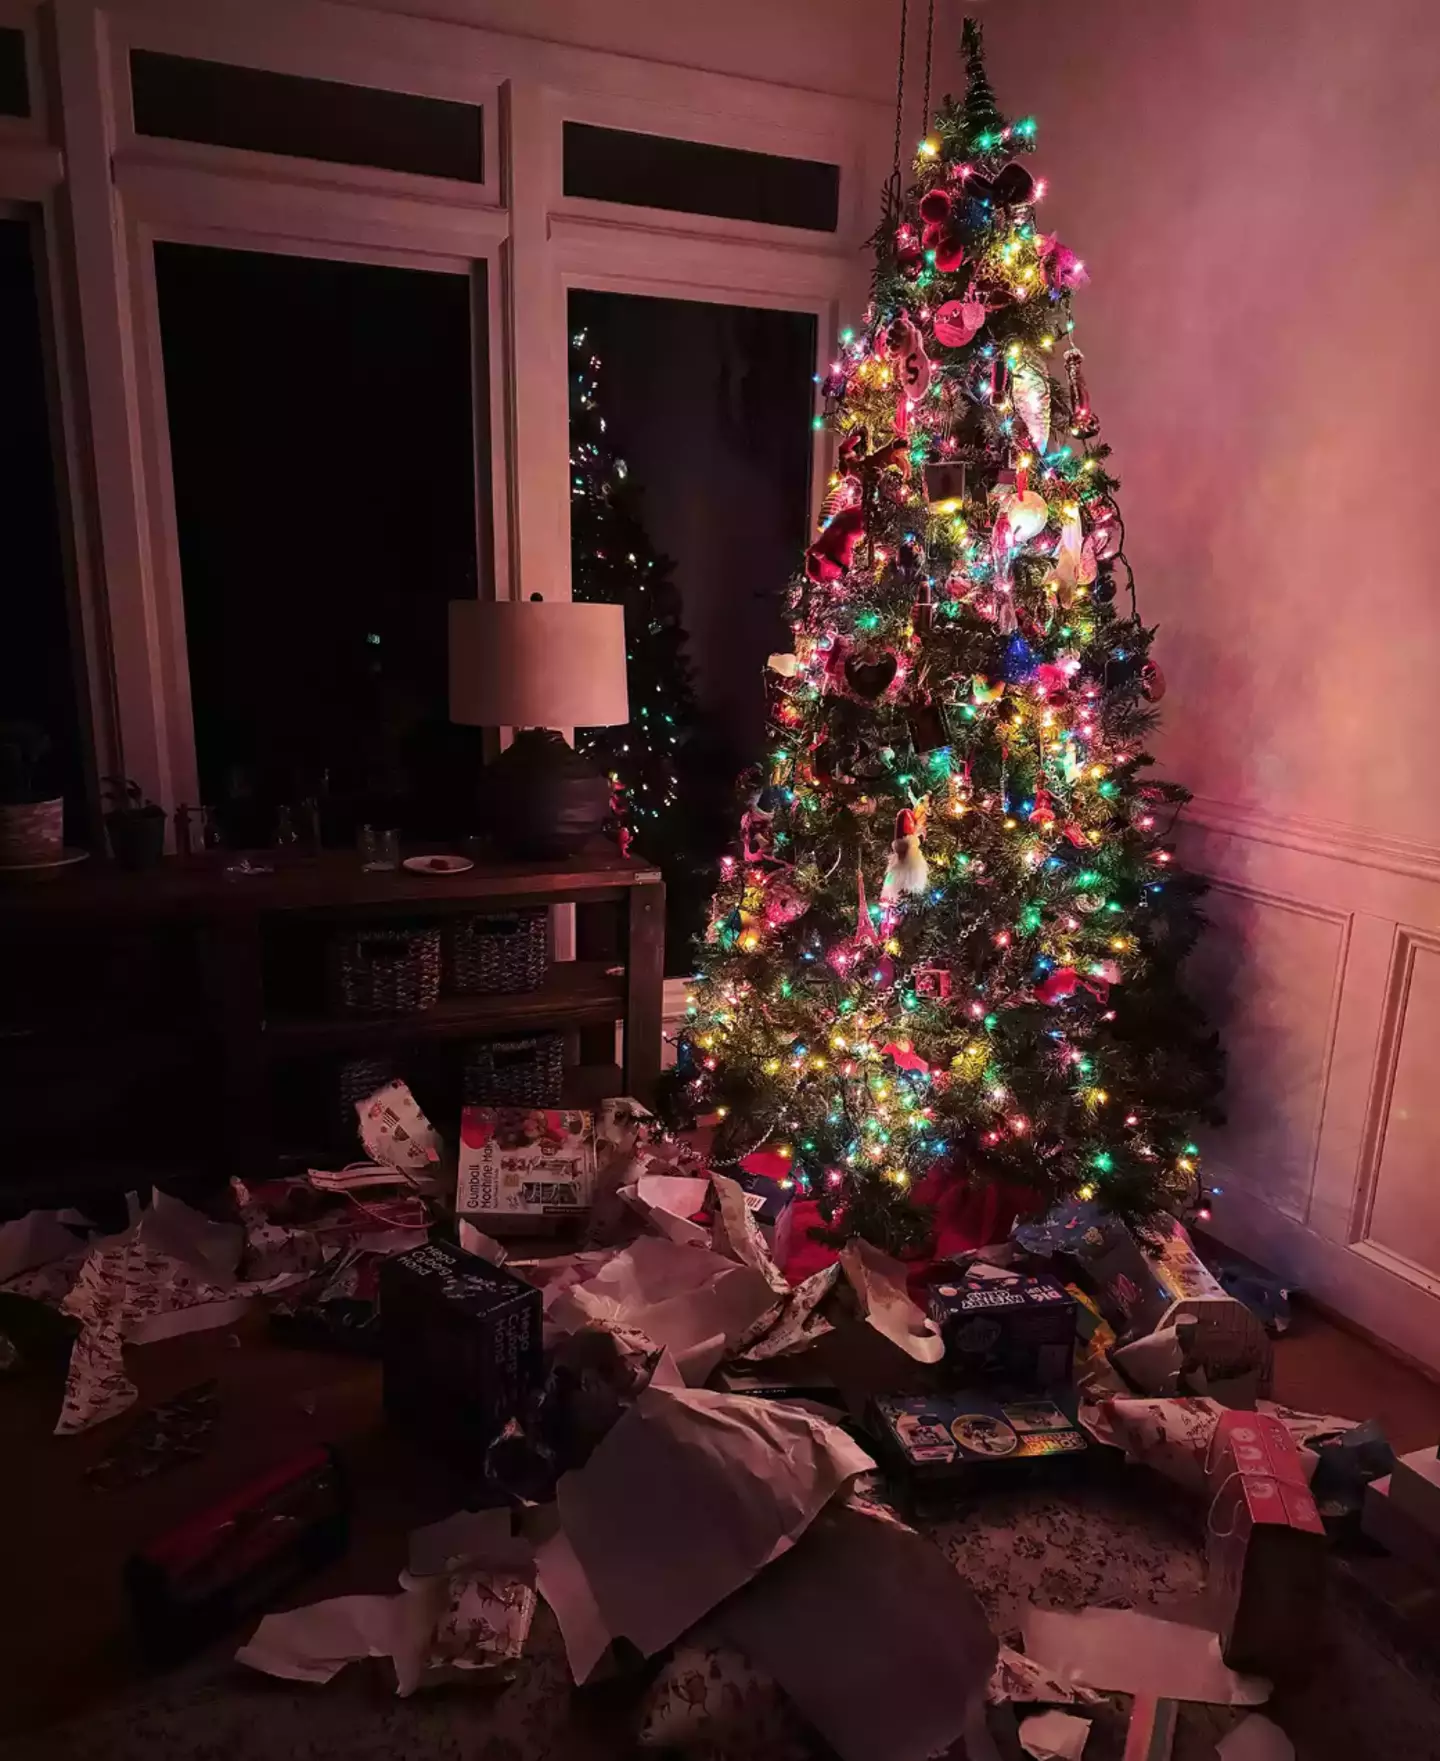 Scott Reintgen's three-year-old son woke up in the middle of the night and opened all the presents underneath the Christmas tree.